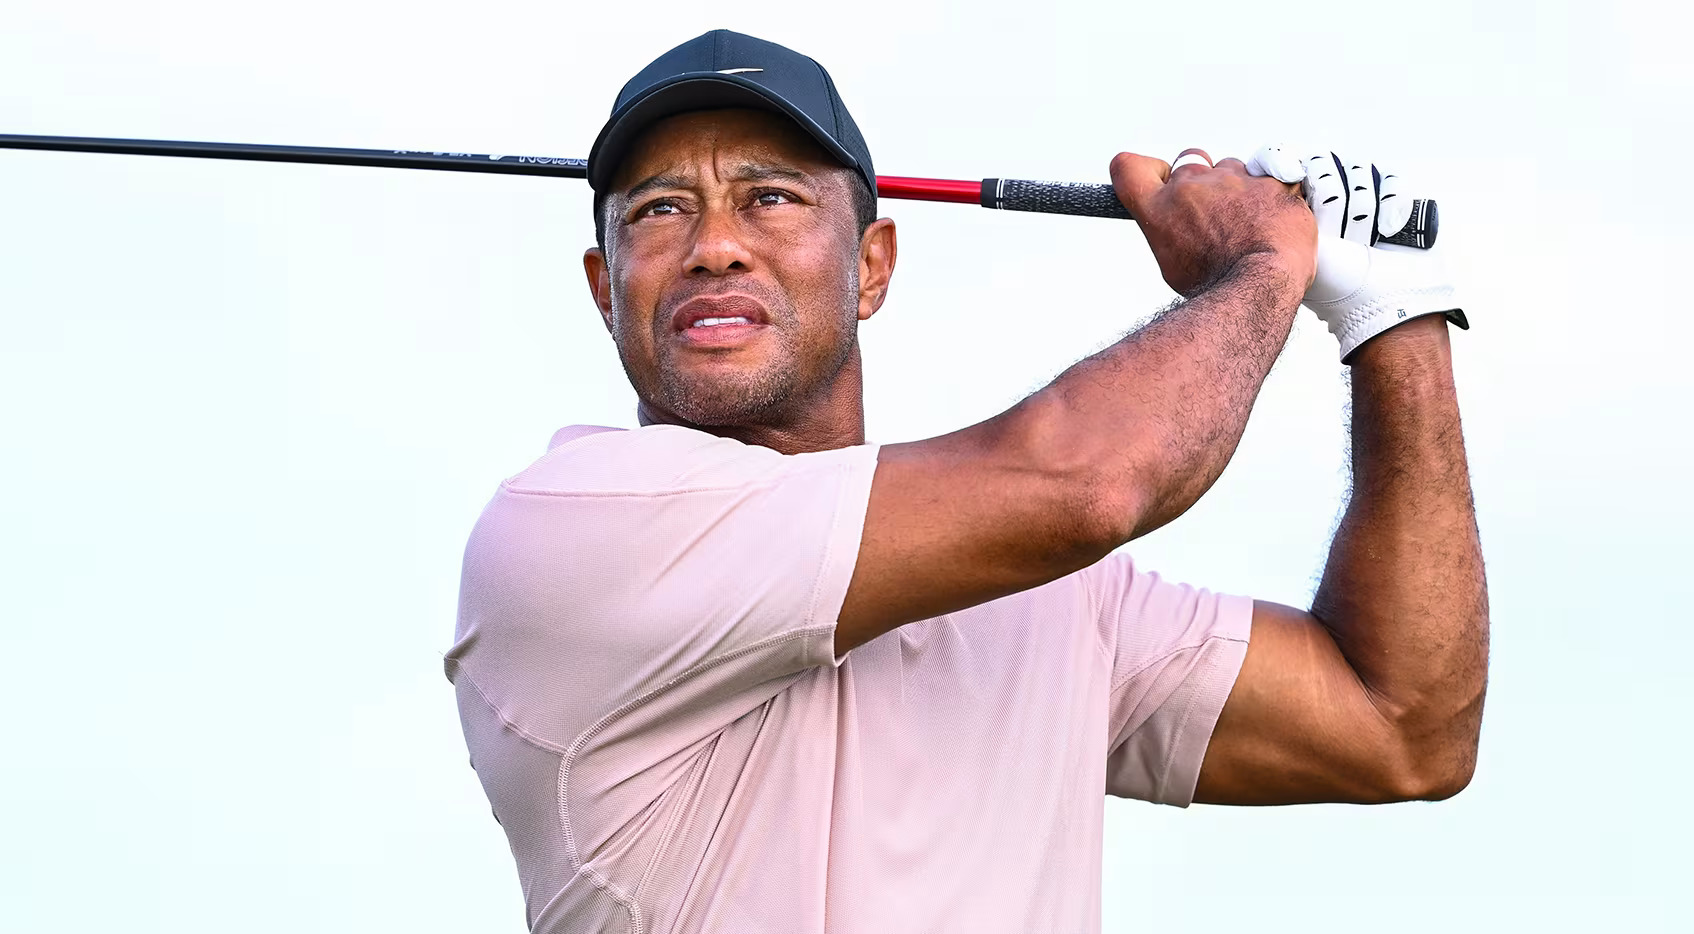 Tiger Woods in a thoughtful pose, reflecting on his future in golf